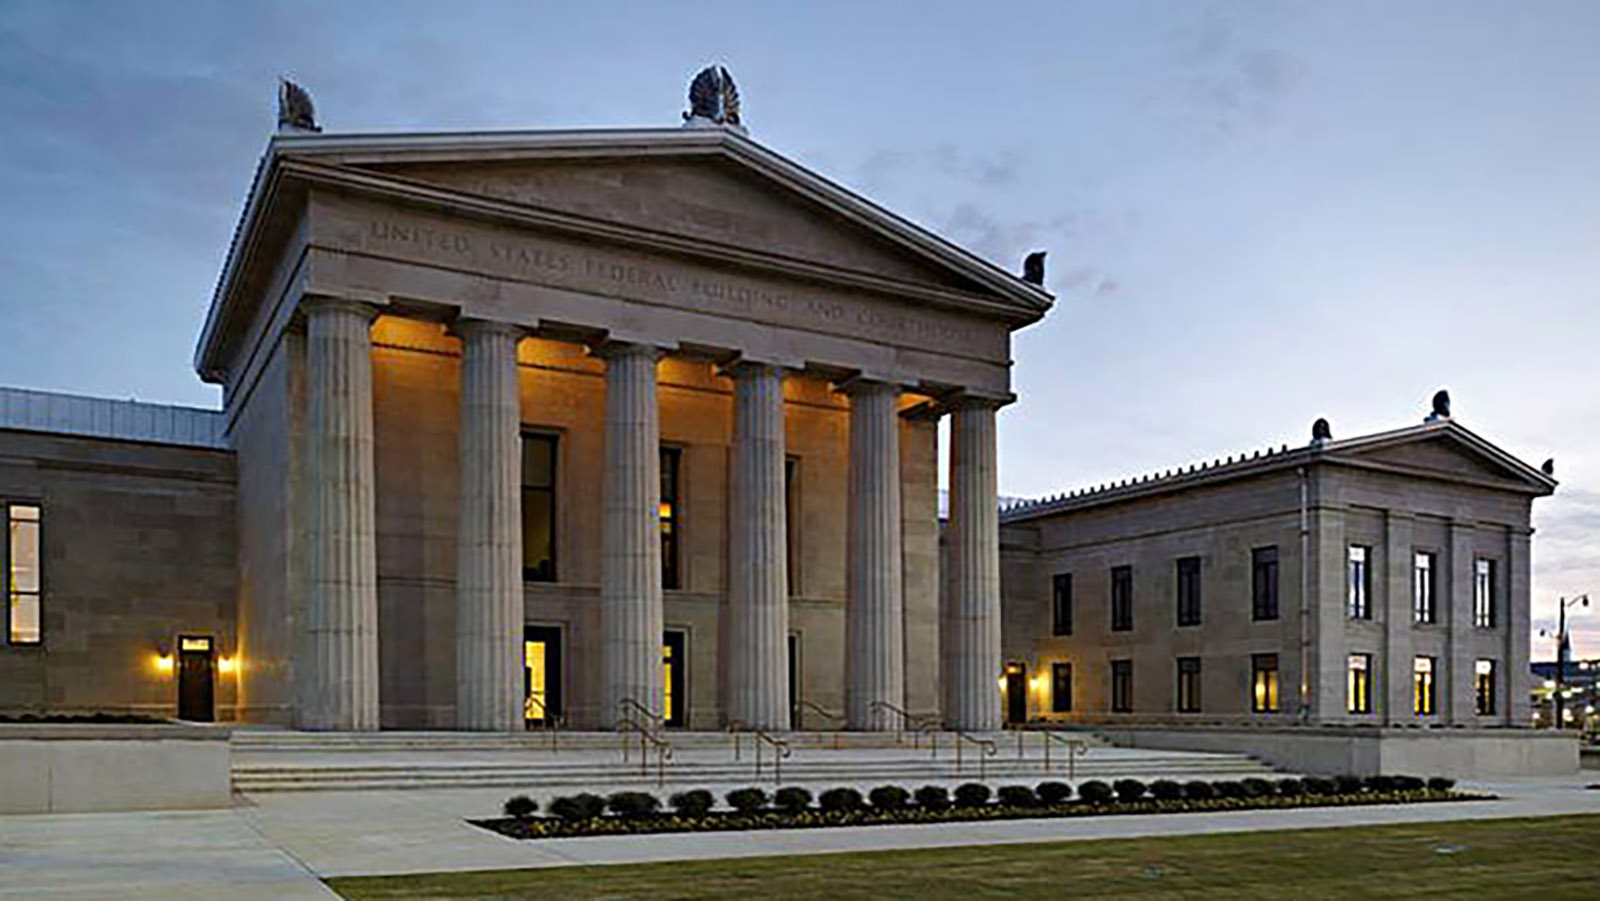 The Tuscaloosa Federal Building and Courthouse, which opened in 2011, Alabama